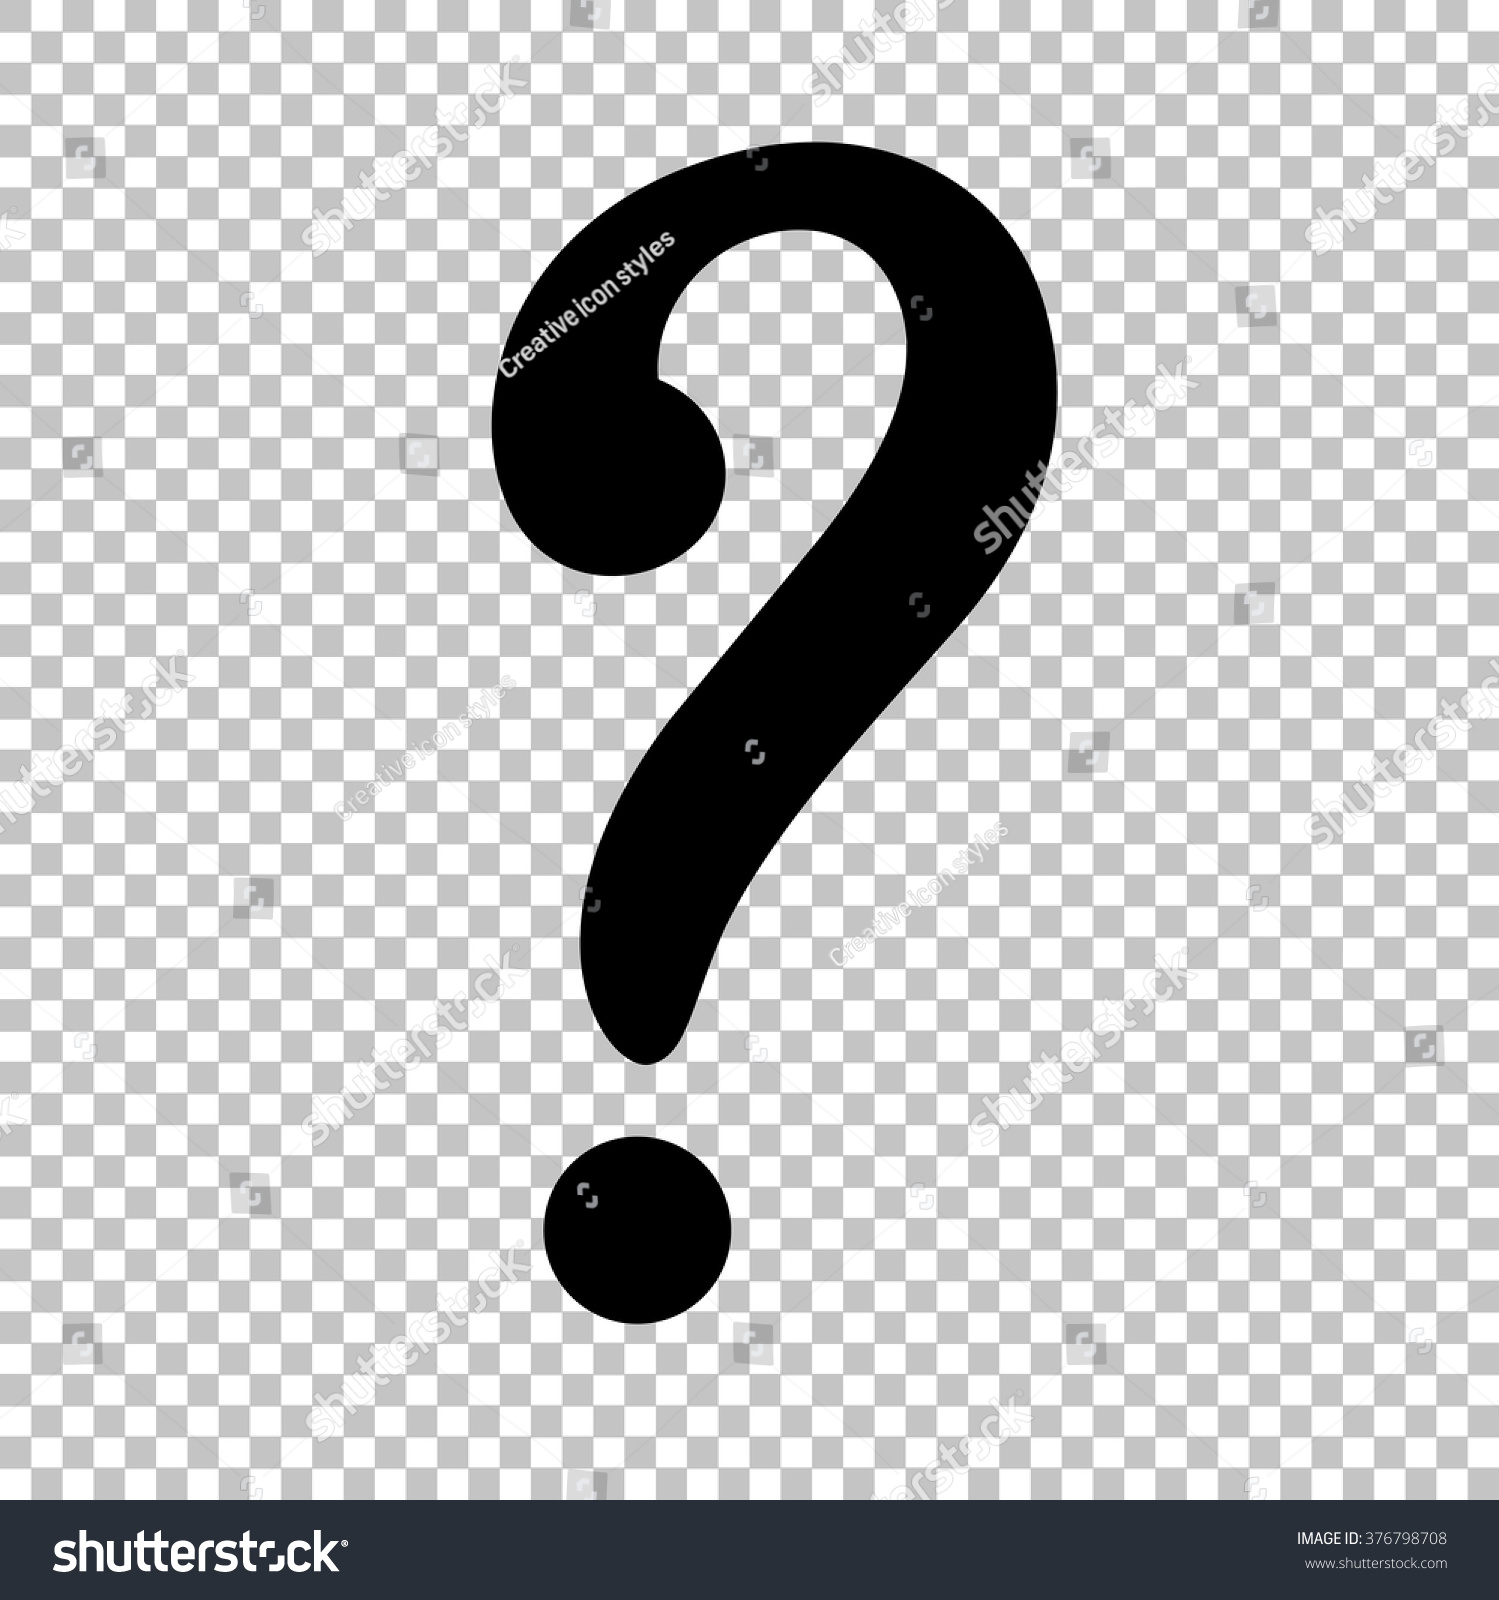 question mark clipart no background - photo #15